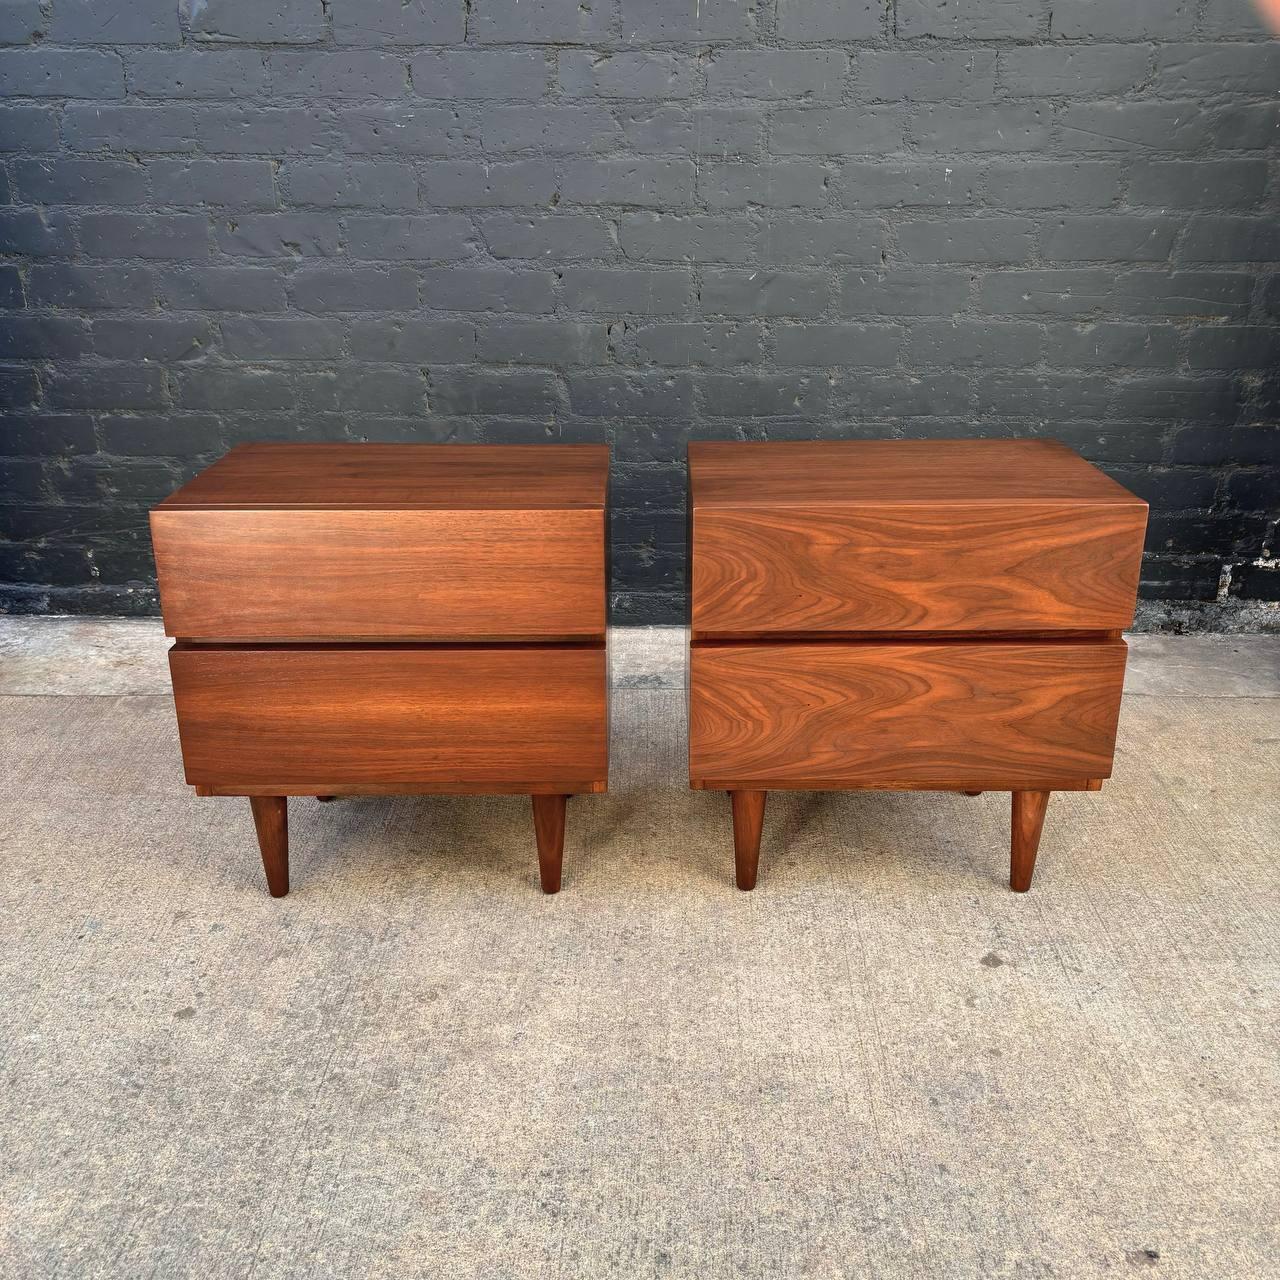 Newly Refinished - Pair of Mid-Century Modern Walnut Night Stands 1